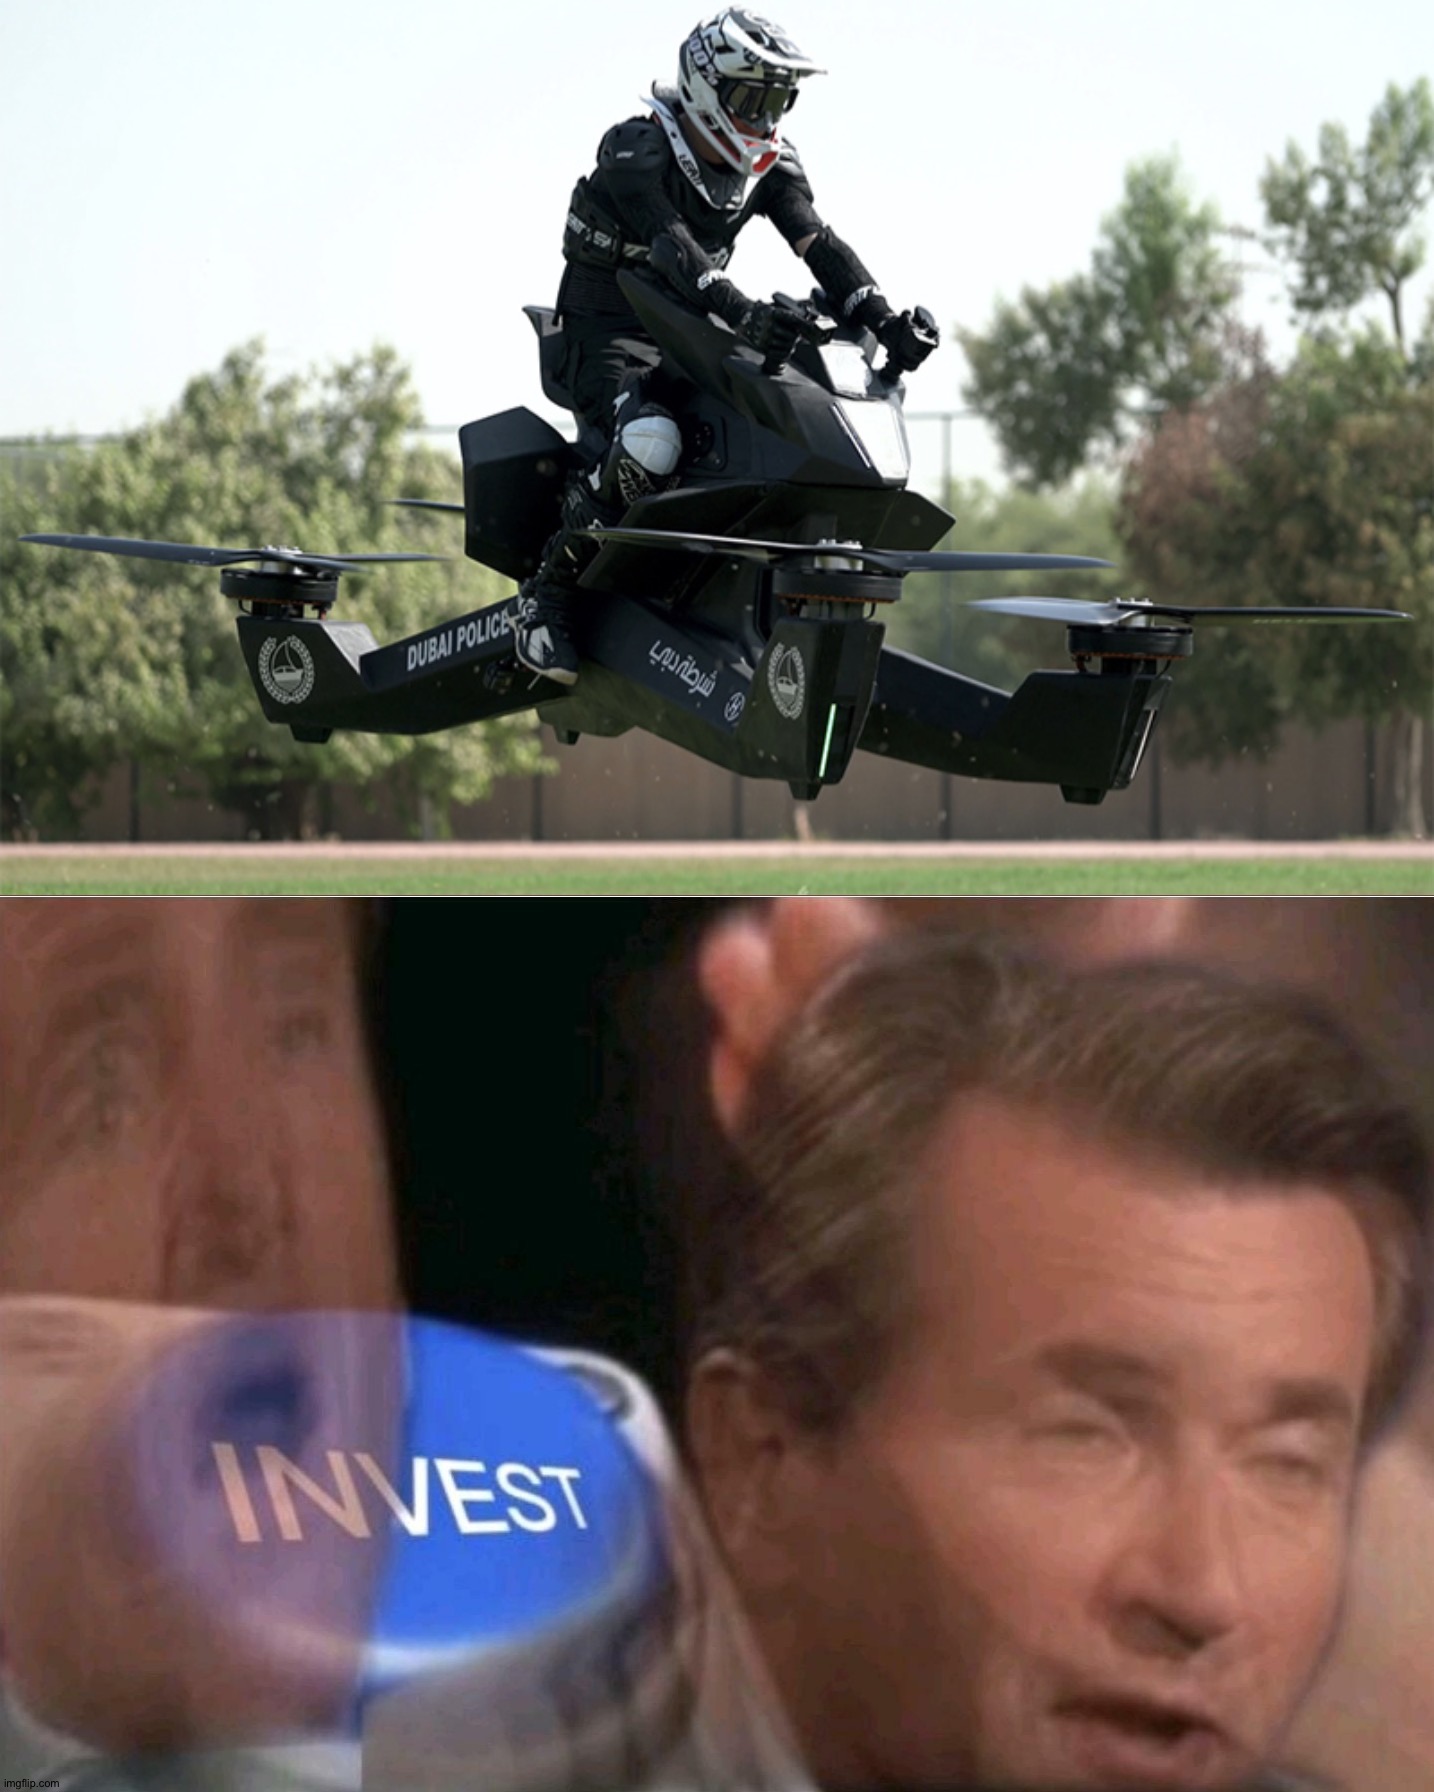 Drone quad bike | image tagged in invest,memes,funny,funny memes,i'll take your entire stock,ha ha tags go brr | made w/ Imgflip meme maker